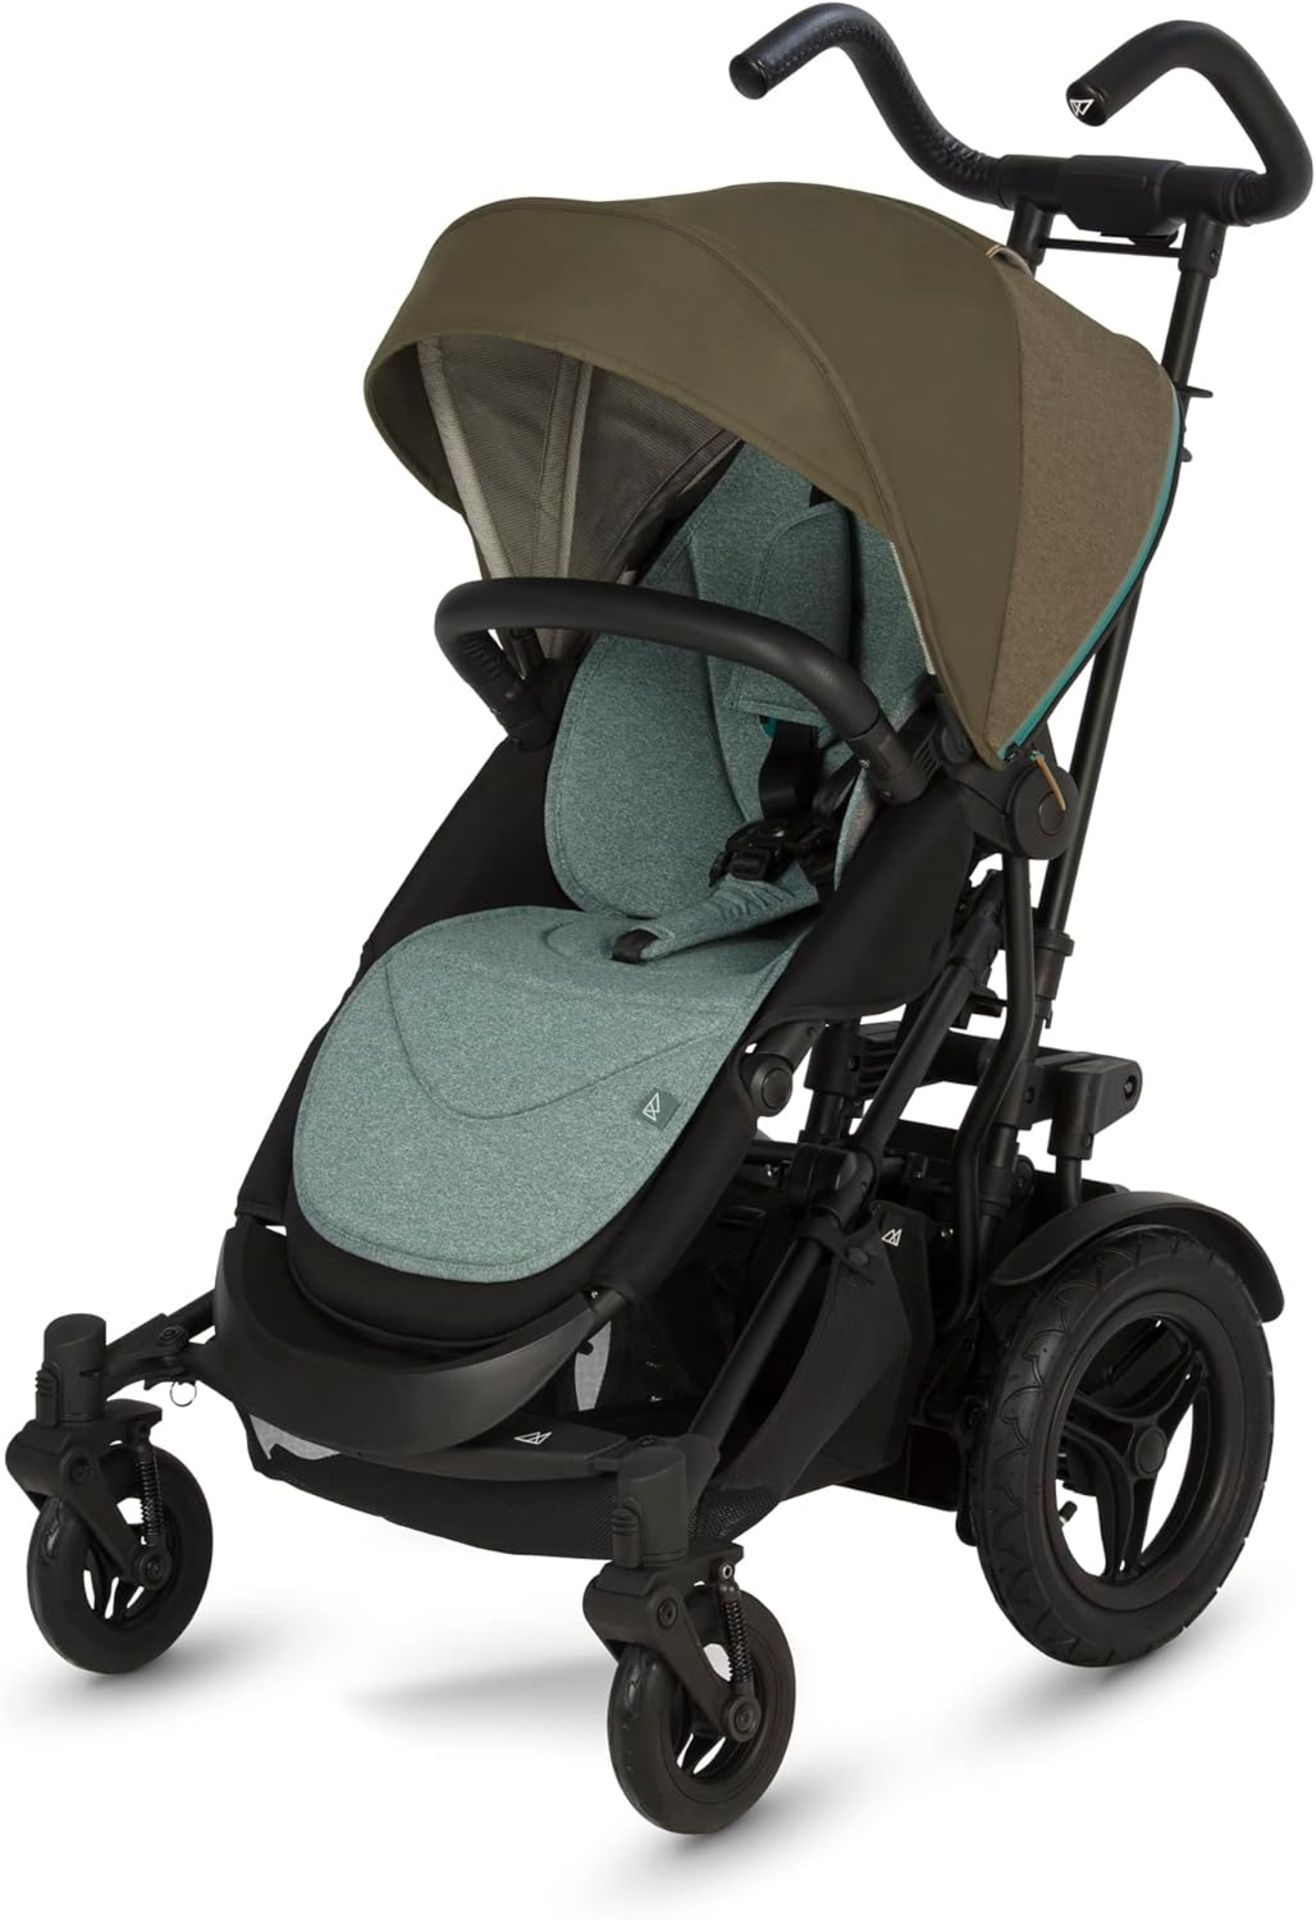 BRAND NEW MICRALITE TWO FOLD EVERGREEN FOLDING BABY PUSHCHAIR R19-6